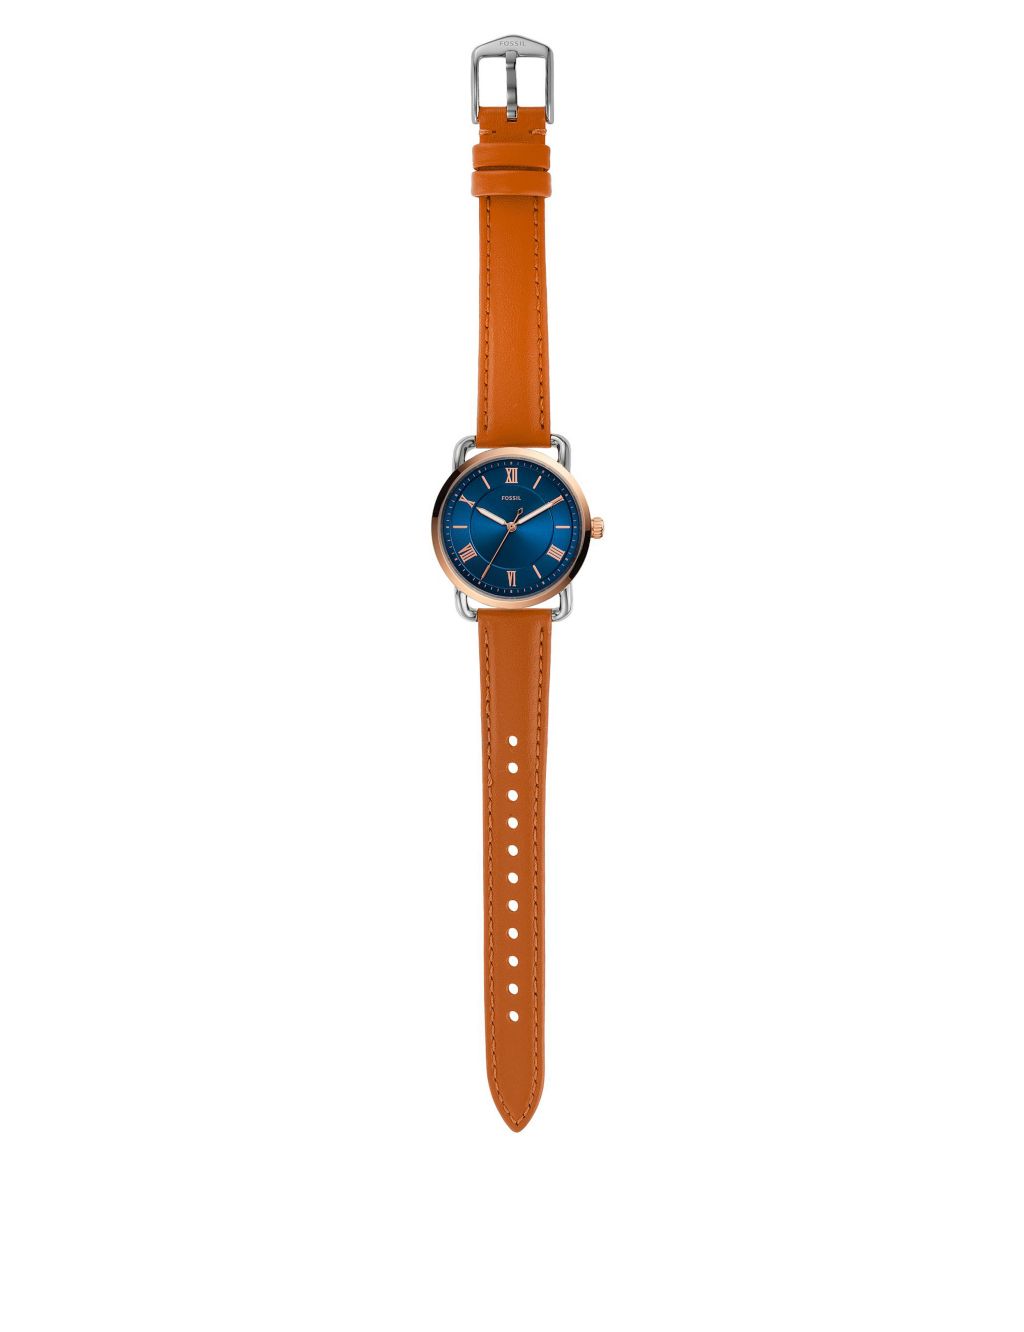 Fossil Copeland Tan Leather Watch image 6